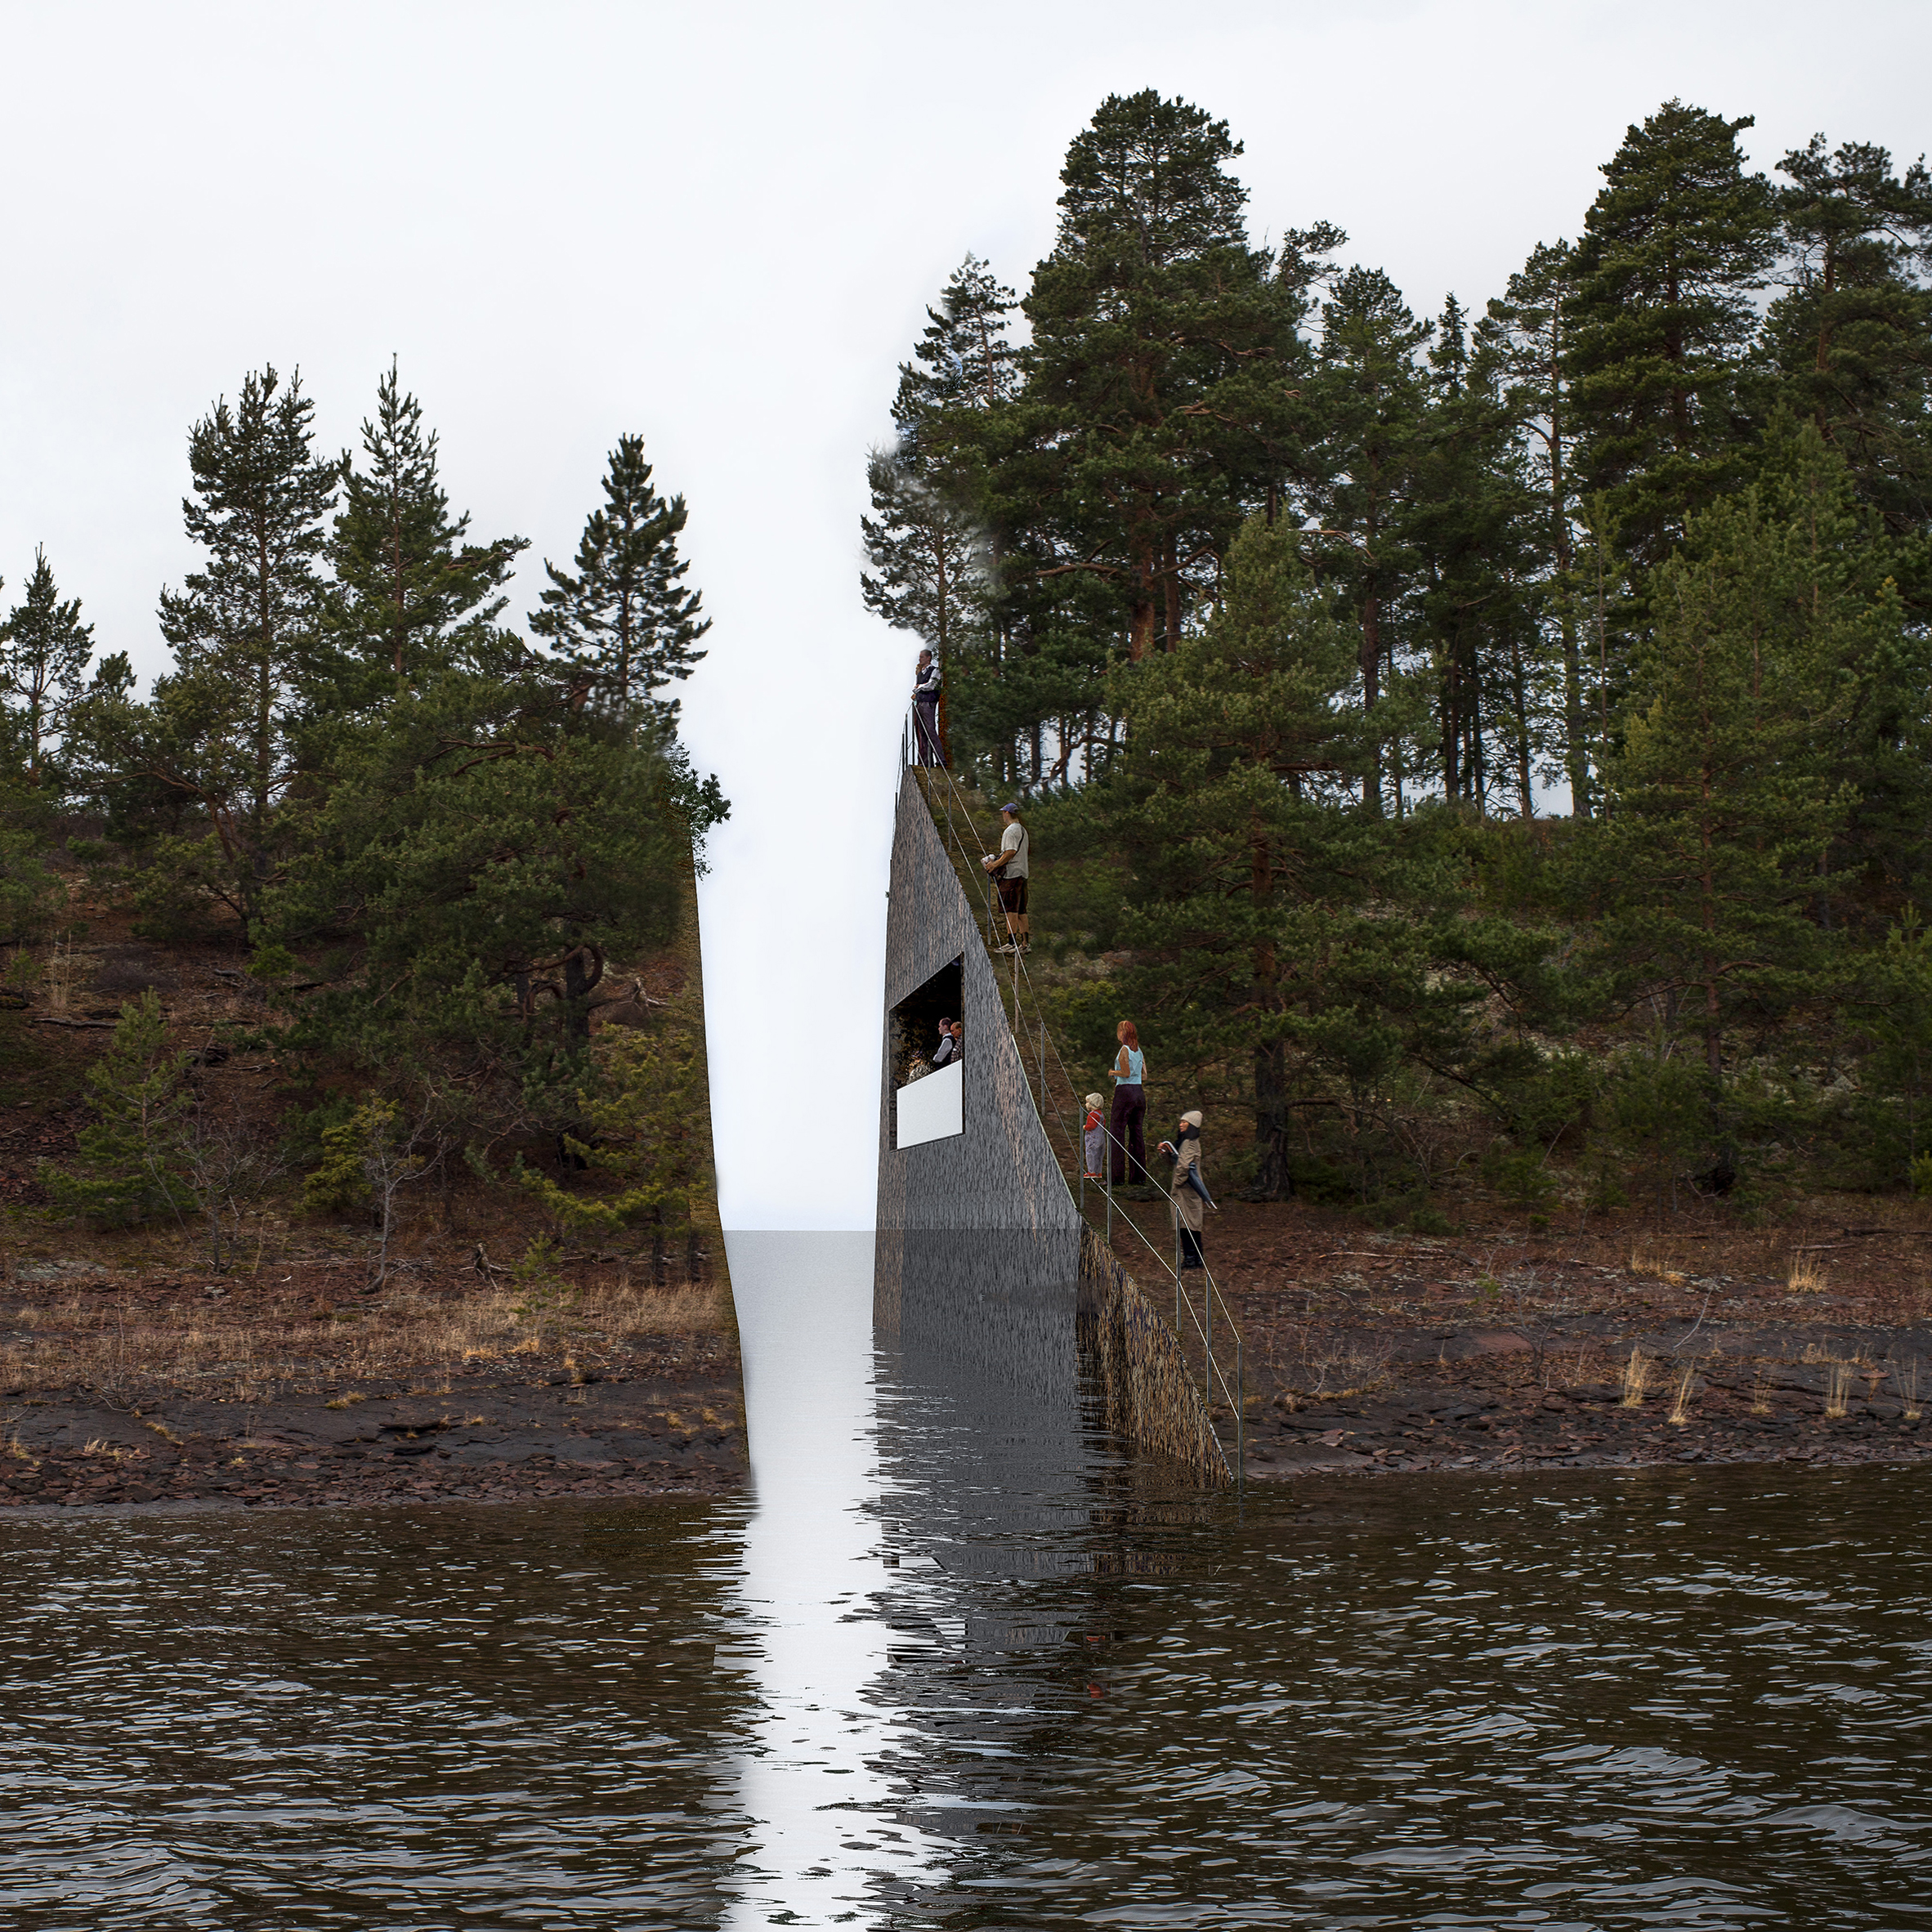 Norway moves to scrap plans for controversial Utøya memorial